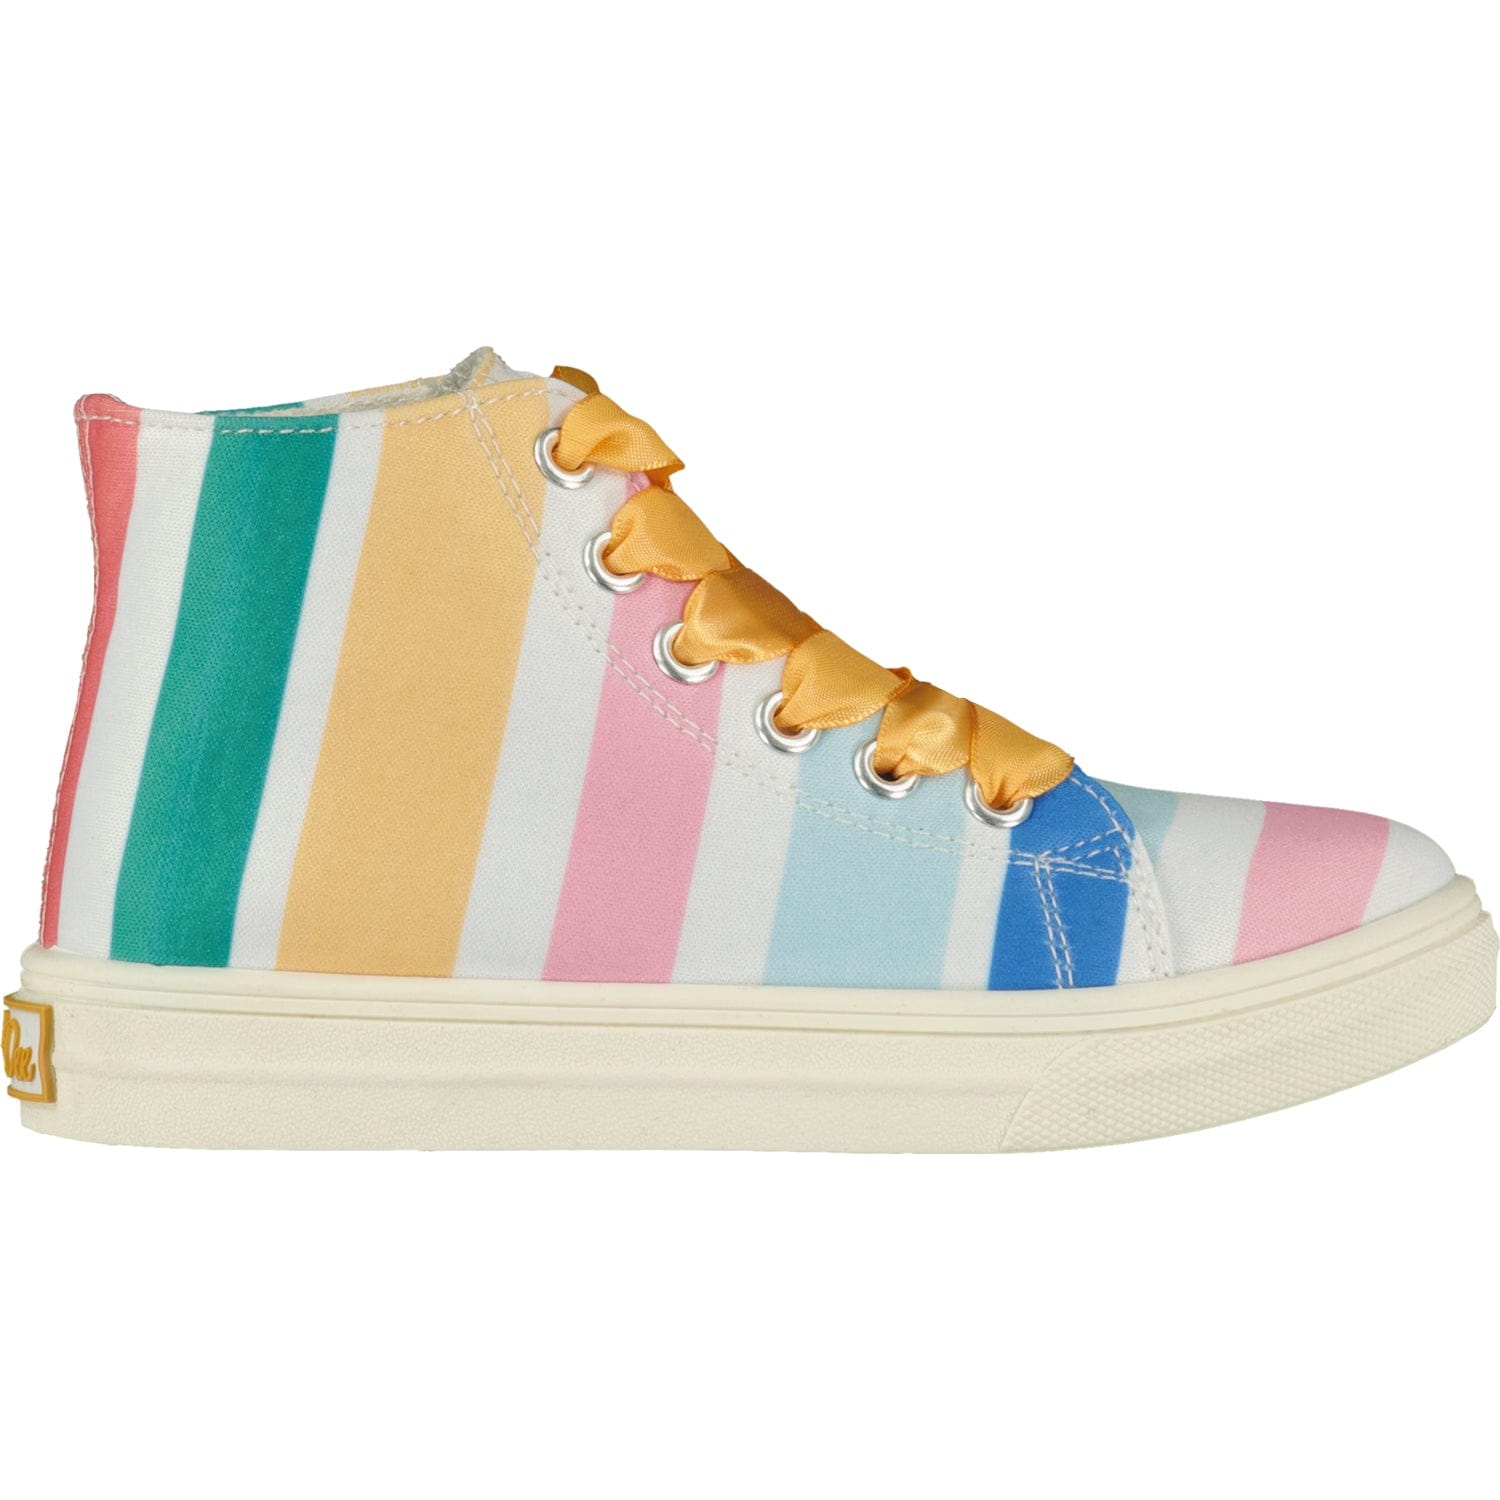 A DEE - Jazzy Stripe Printed High Top - Sunflower Yellow